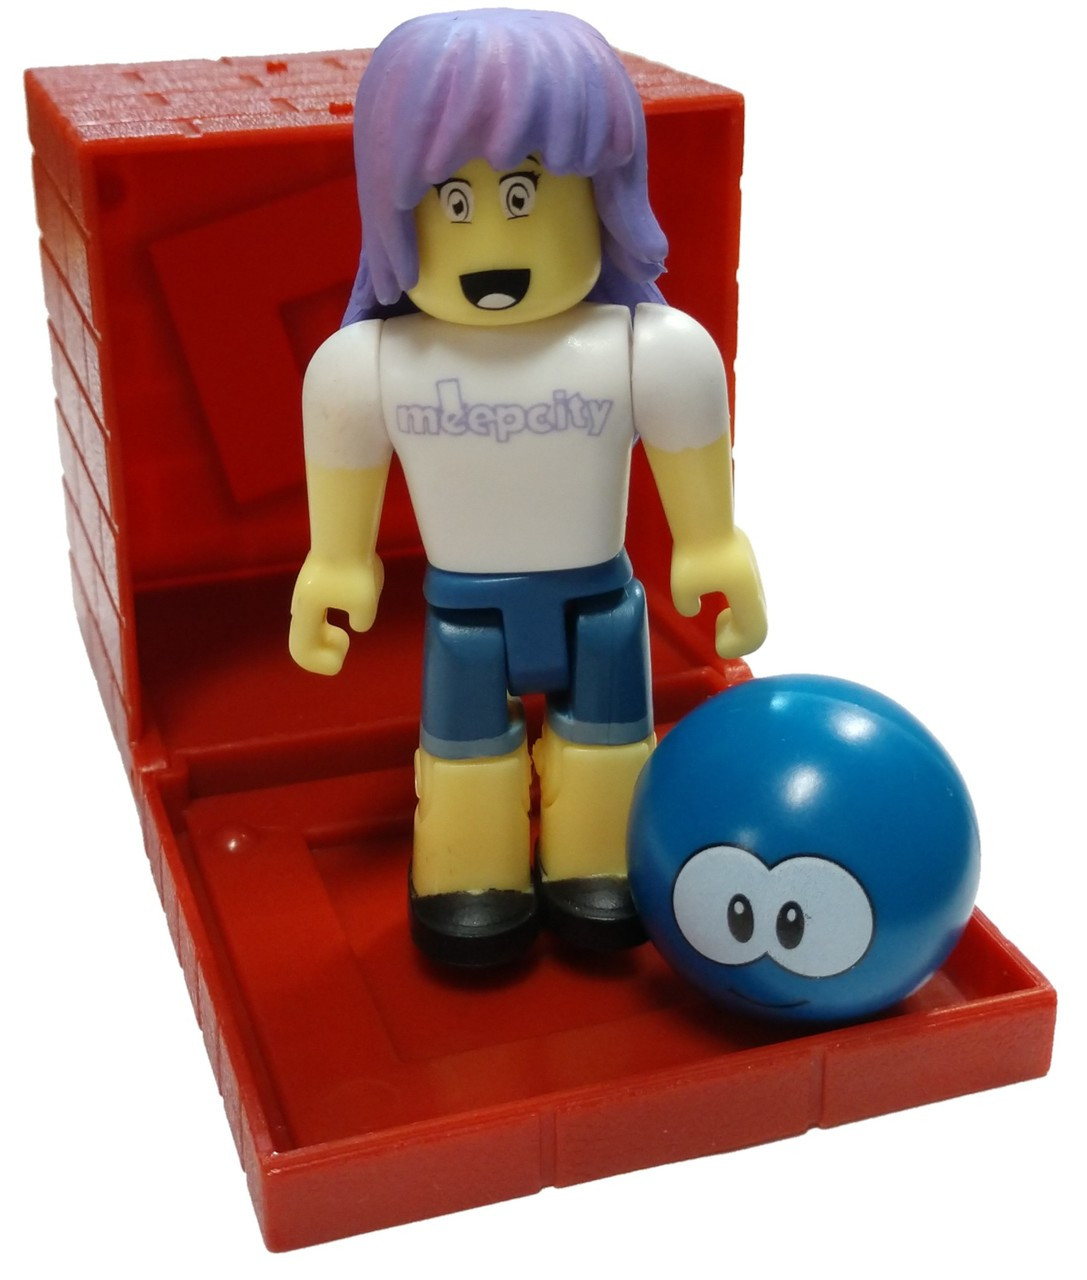 Roblox Red Series 4 Meepcity Pet Seller 3 Mini Figure With Red Cube And Online Code Loose Jazwares Toywiz - roblox guest play meep city